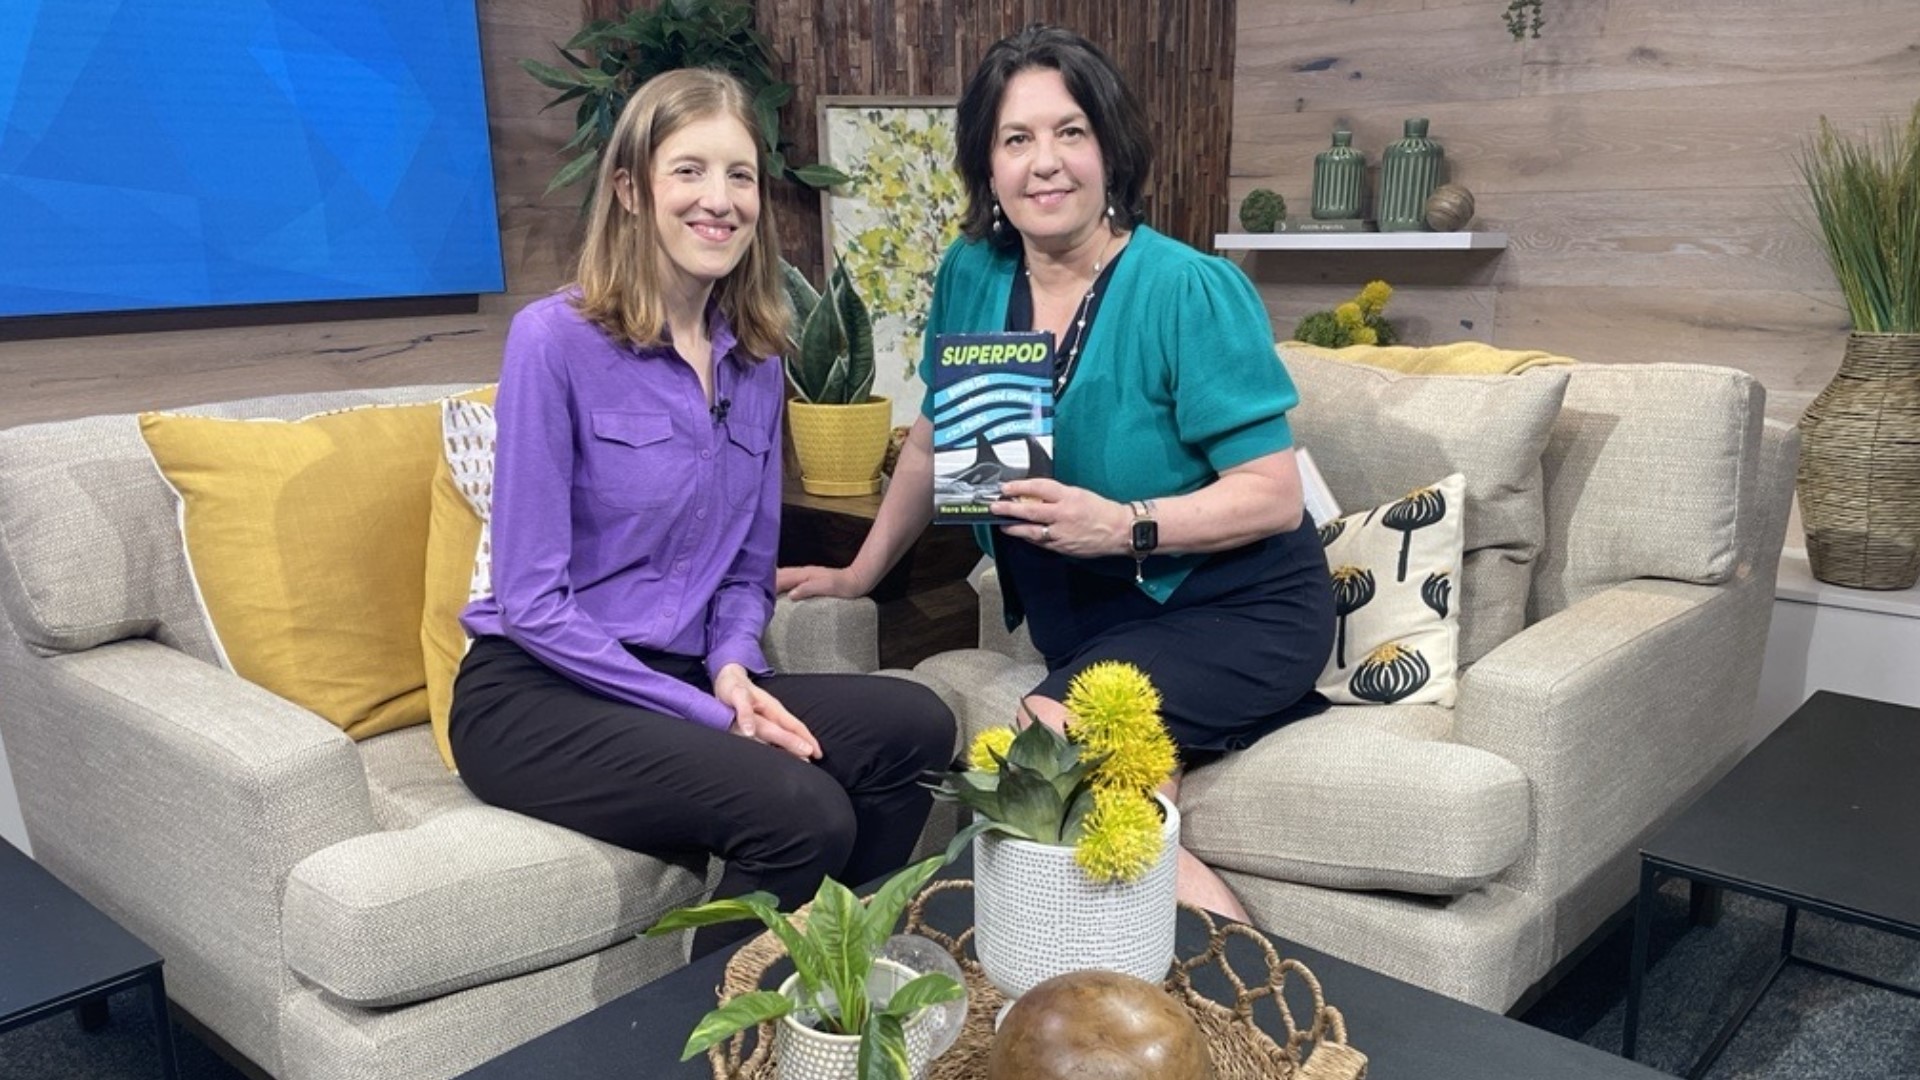 Author and Seattle aquarium employee Nora Nickum joined the show to talk about her book "Superpod," and how we can save the endangered orcas of the PNW. #newdaynw